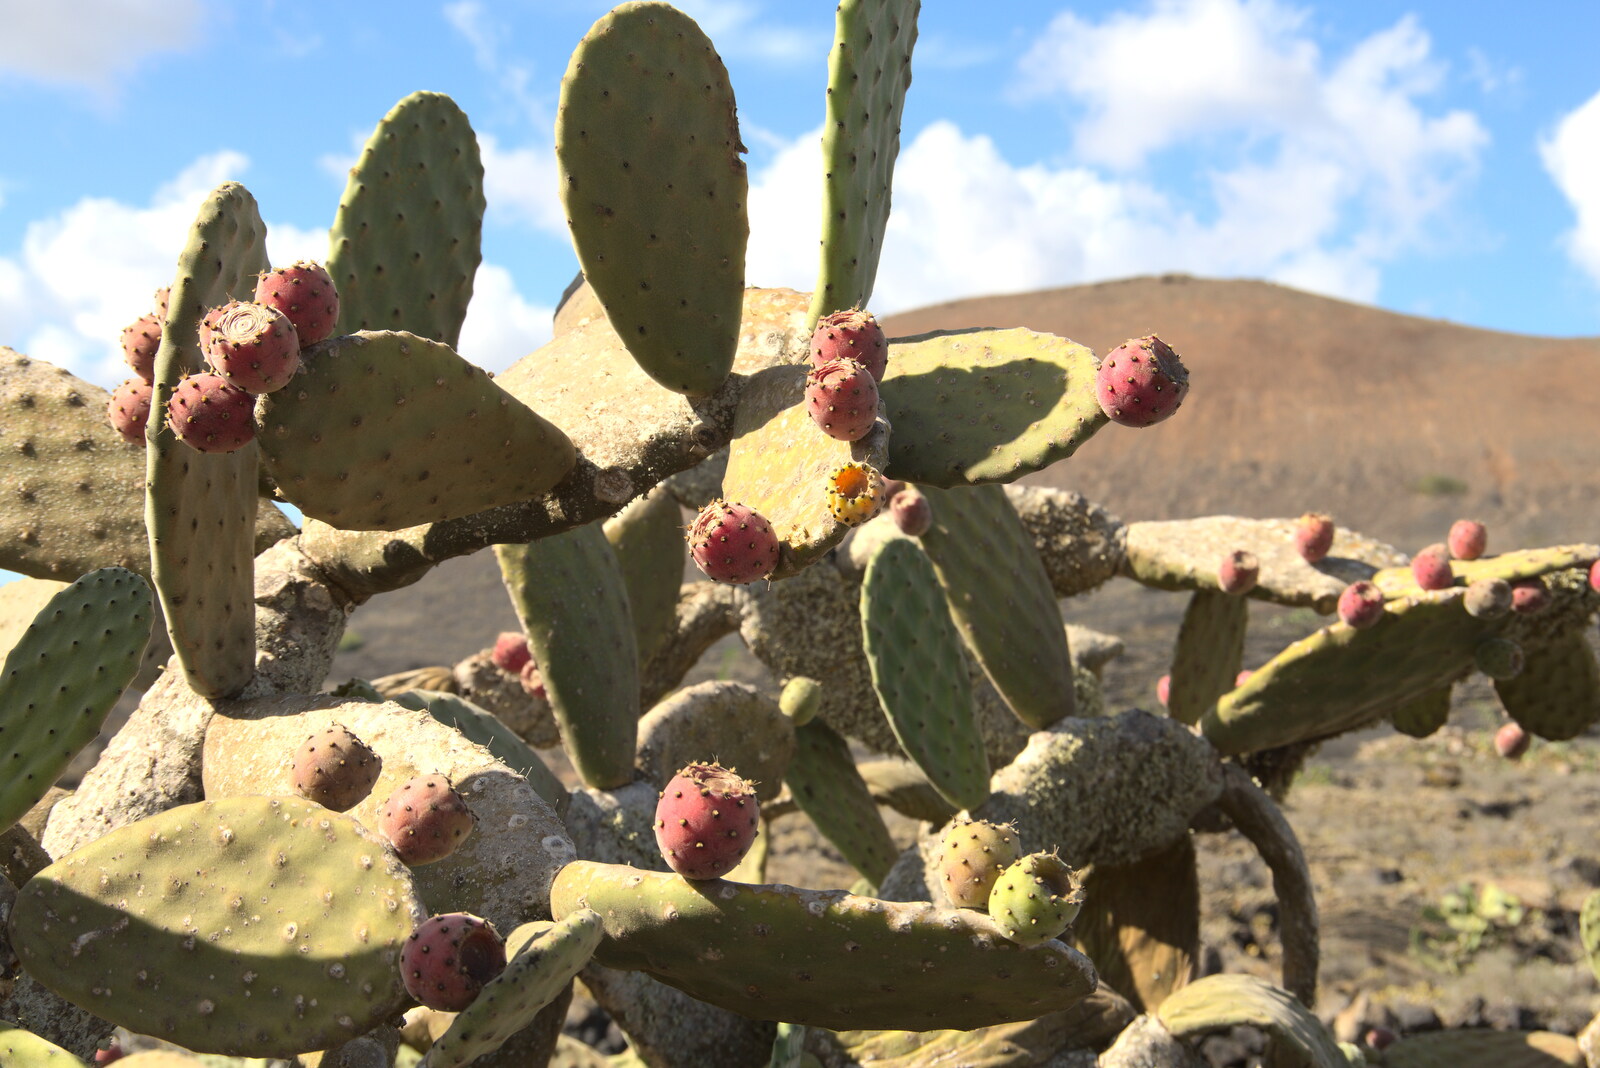 A big prickly pear cactus from The Volcanoes of Lanzarote, Canary Islands, Spain - 27th October 2021